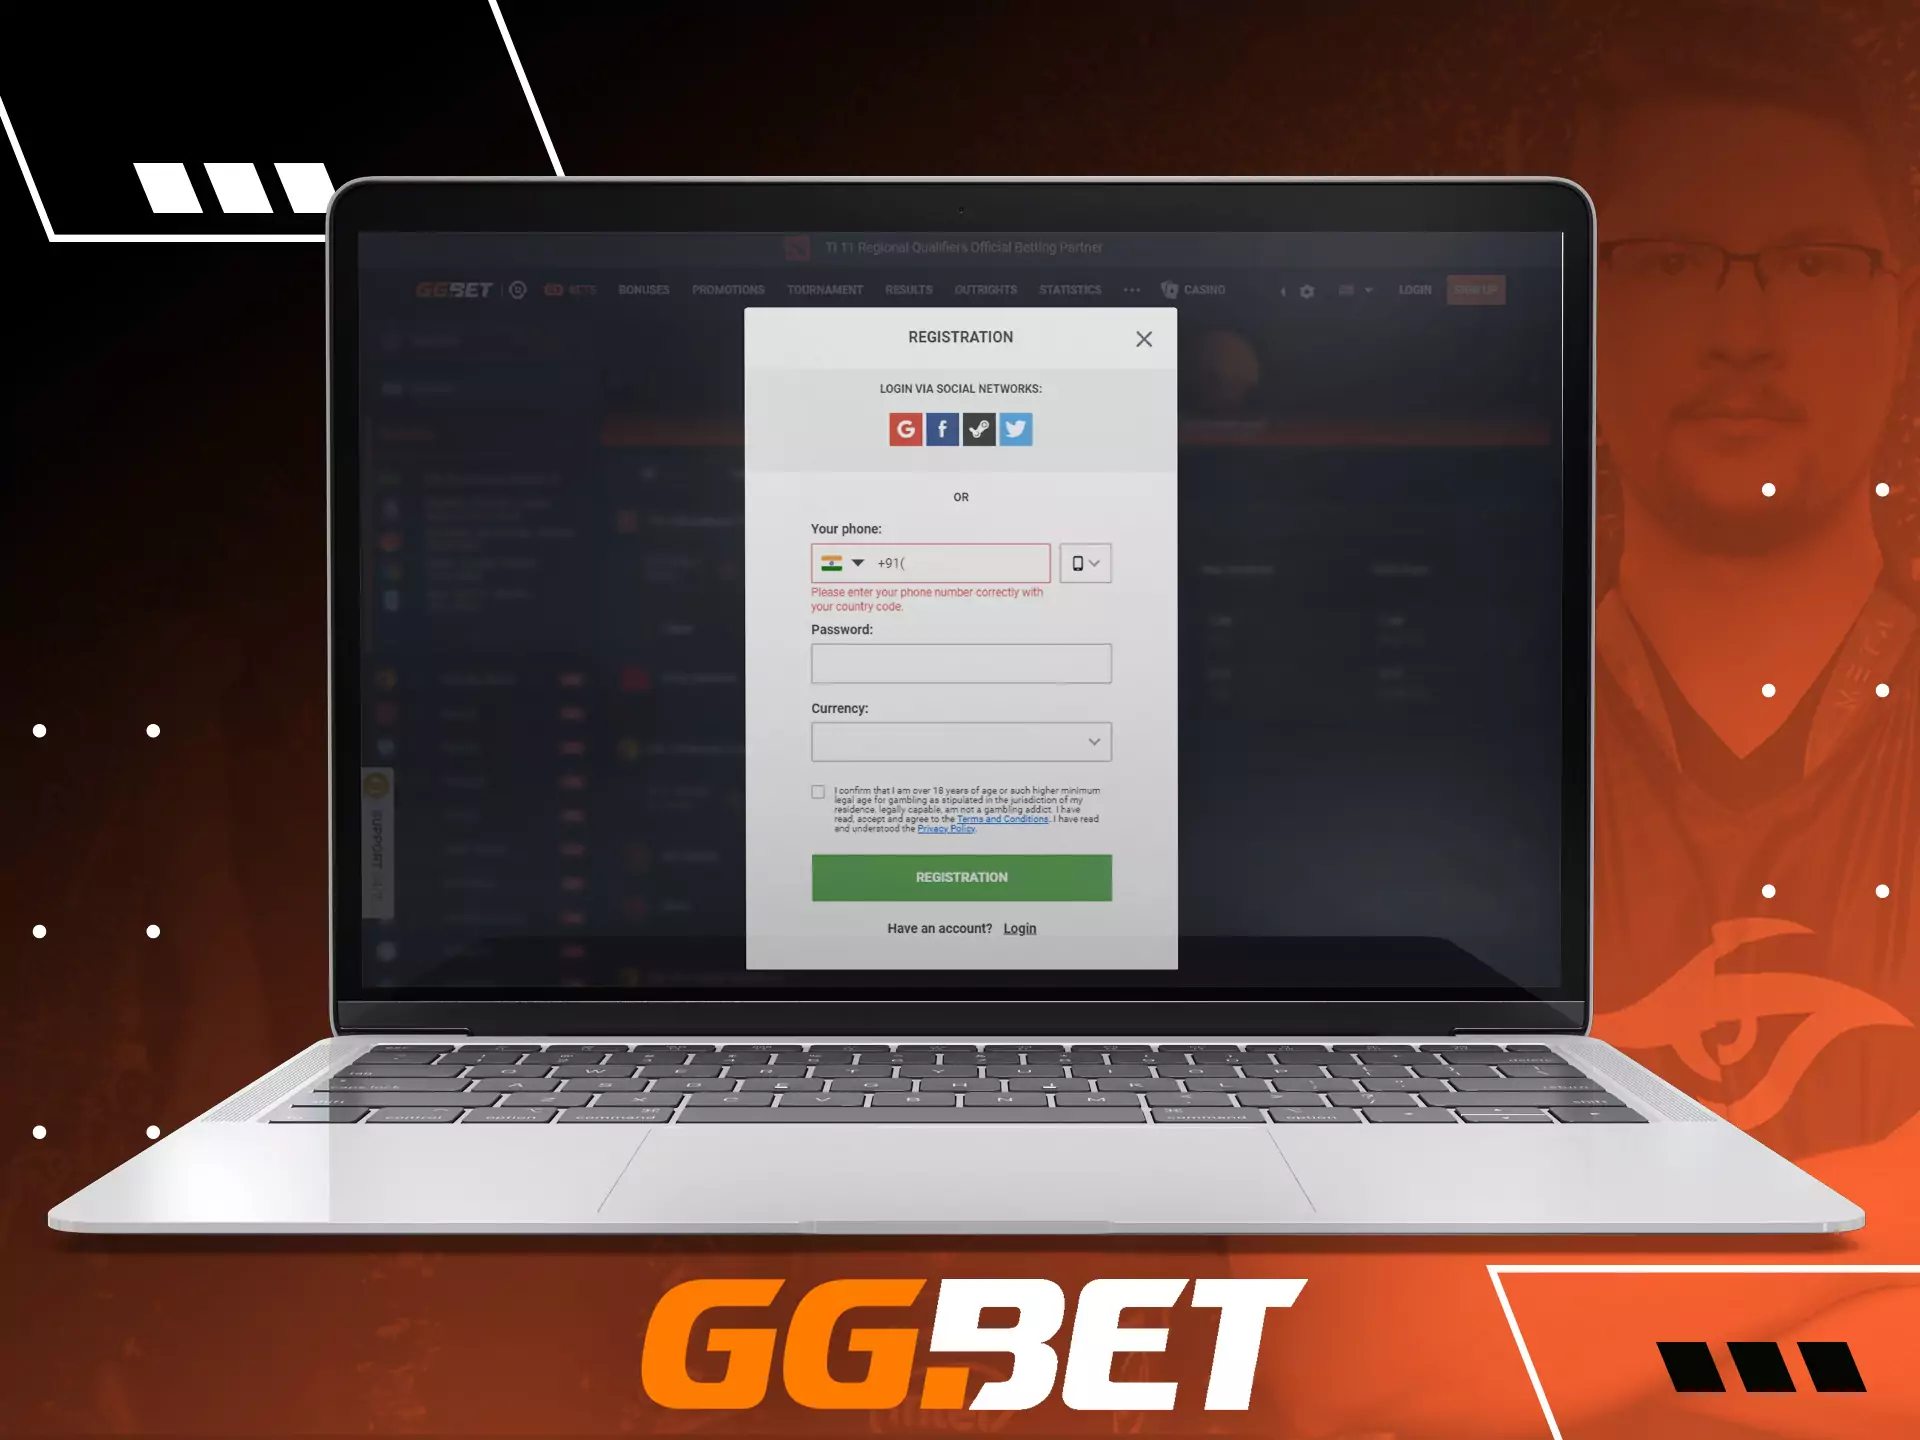 Create an account to join the GGBet community of bettors and players.